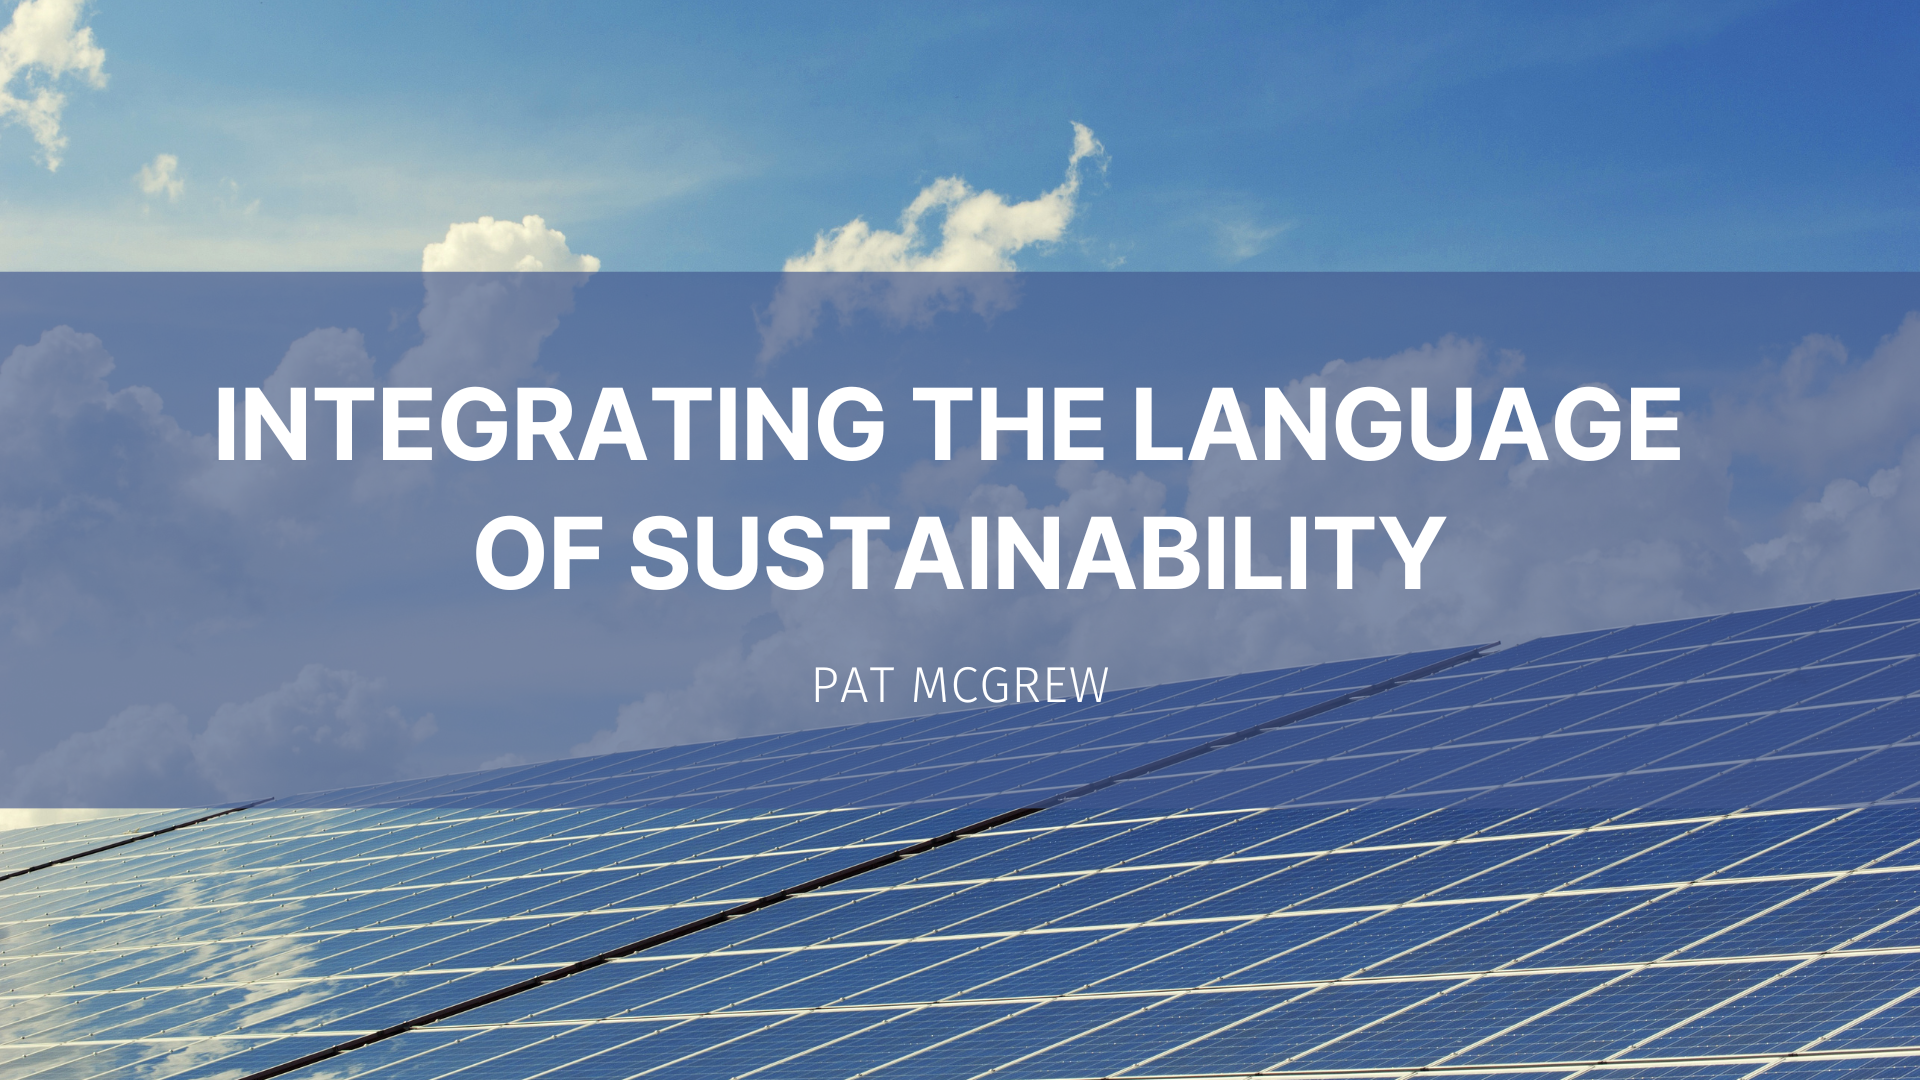 Featured image for “Integrating the Language of Sustainability”